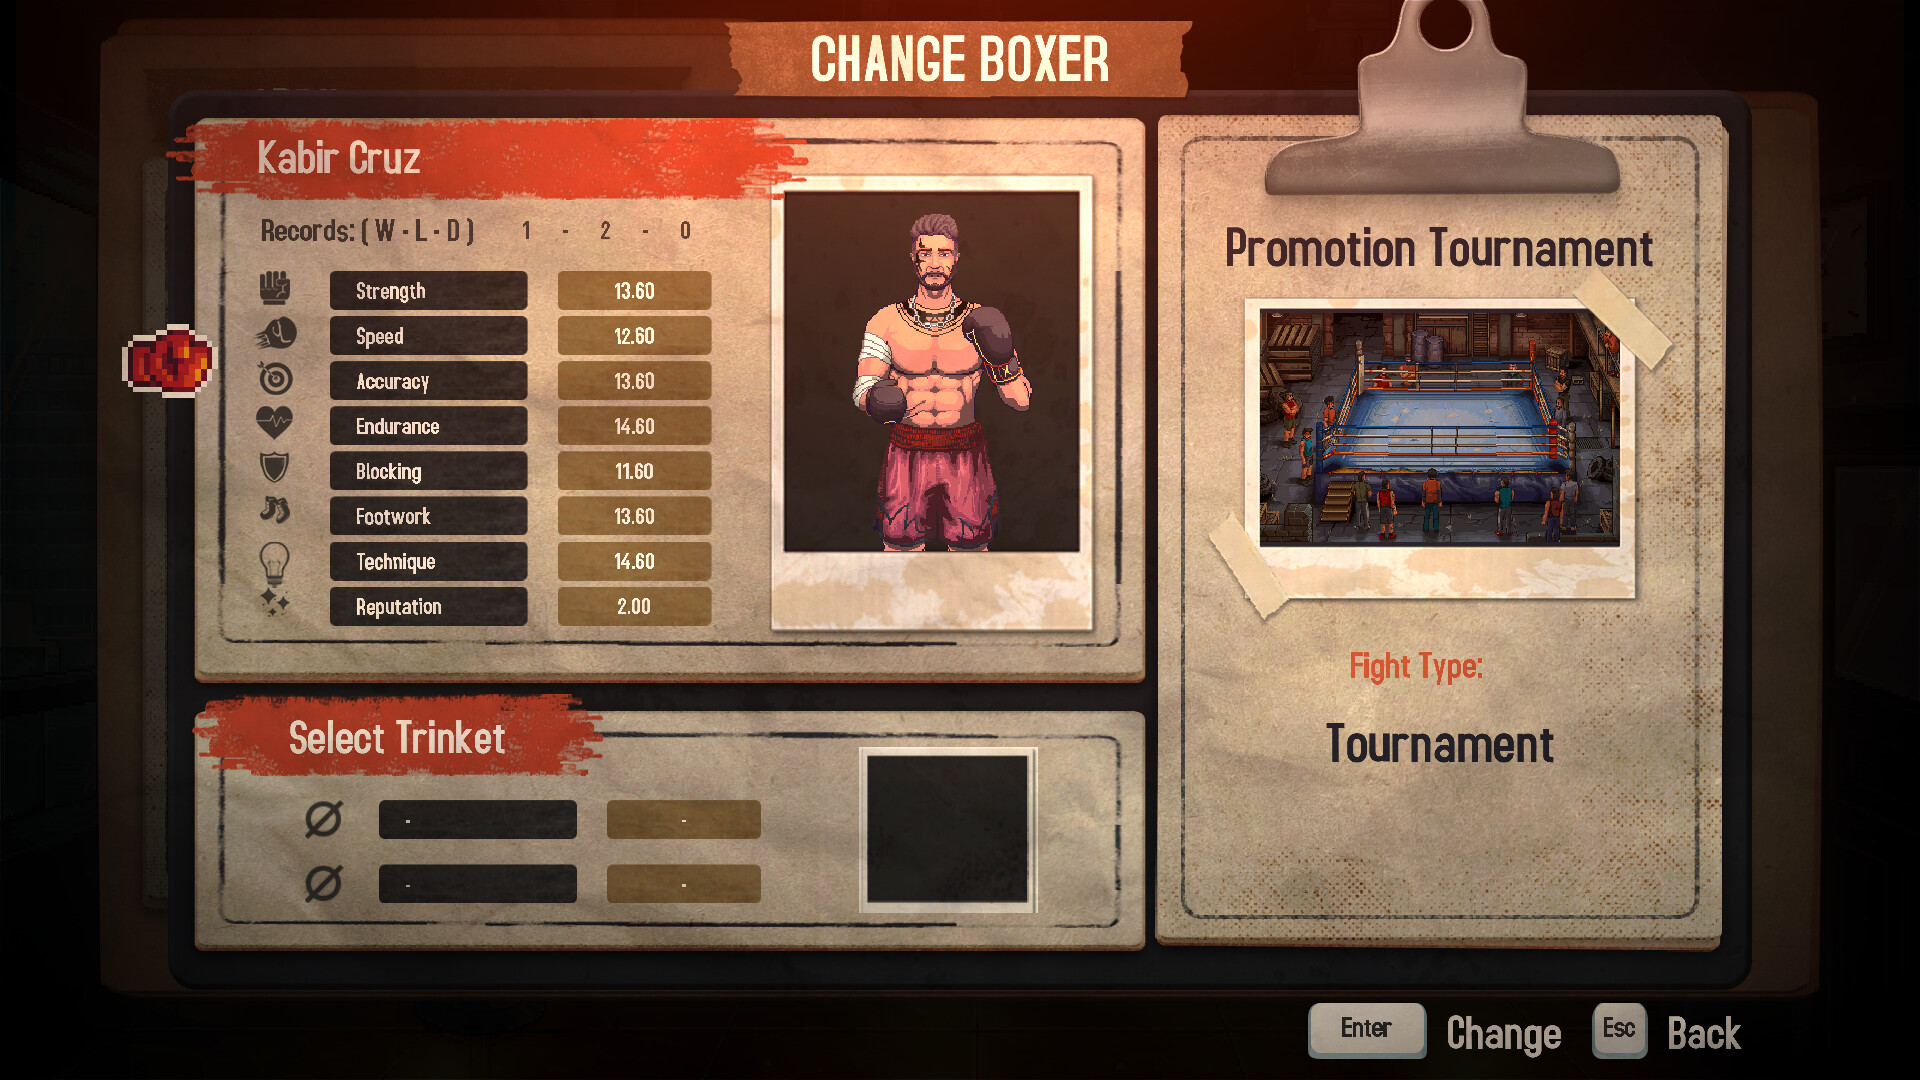 World Championship Boxing Manager  2 Free Download